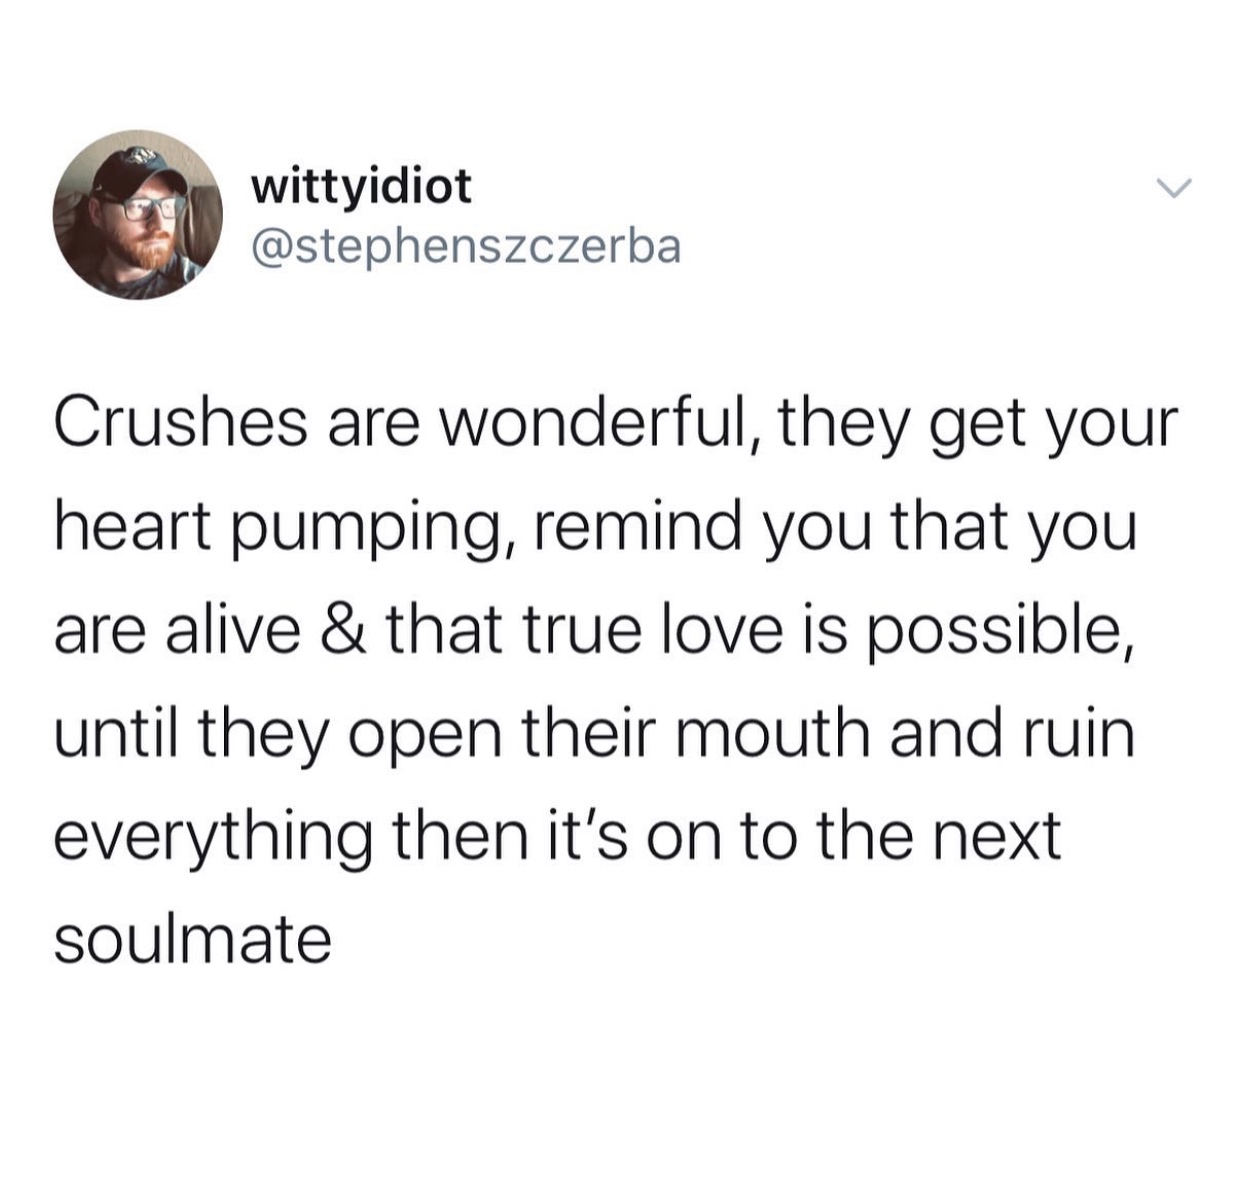 kenneth storey tampa - wittyidiot Crushes are wonderful, they get your heart pumping, remind you that you are alive & that true love is possible, until they open their mouth and ruin everything then it's on to the next soulmate